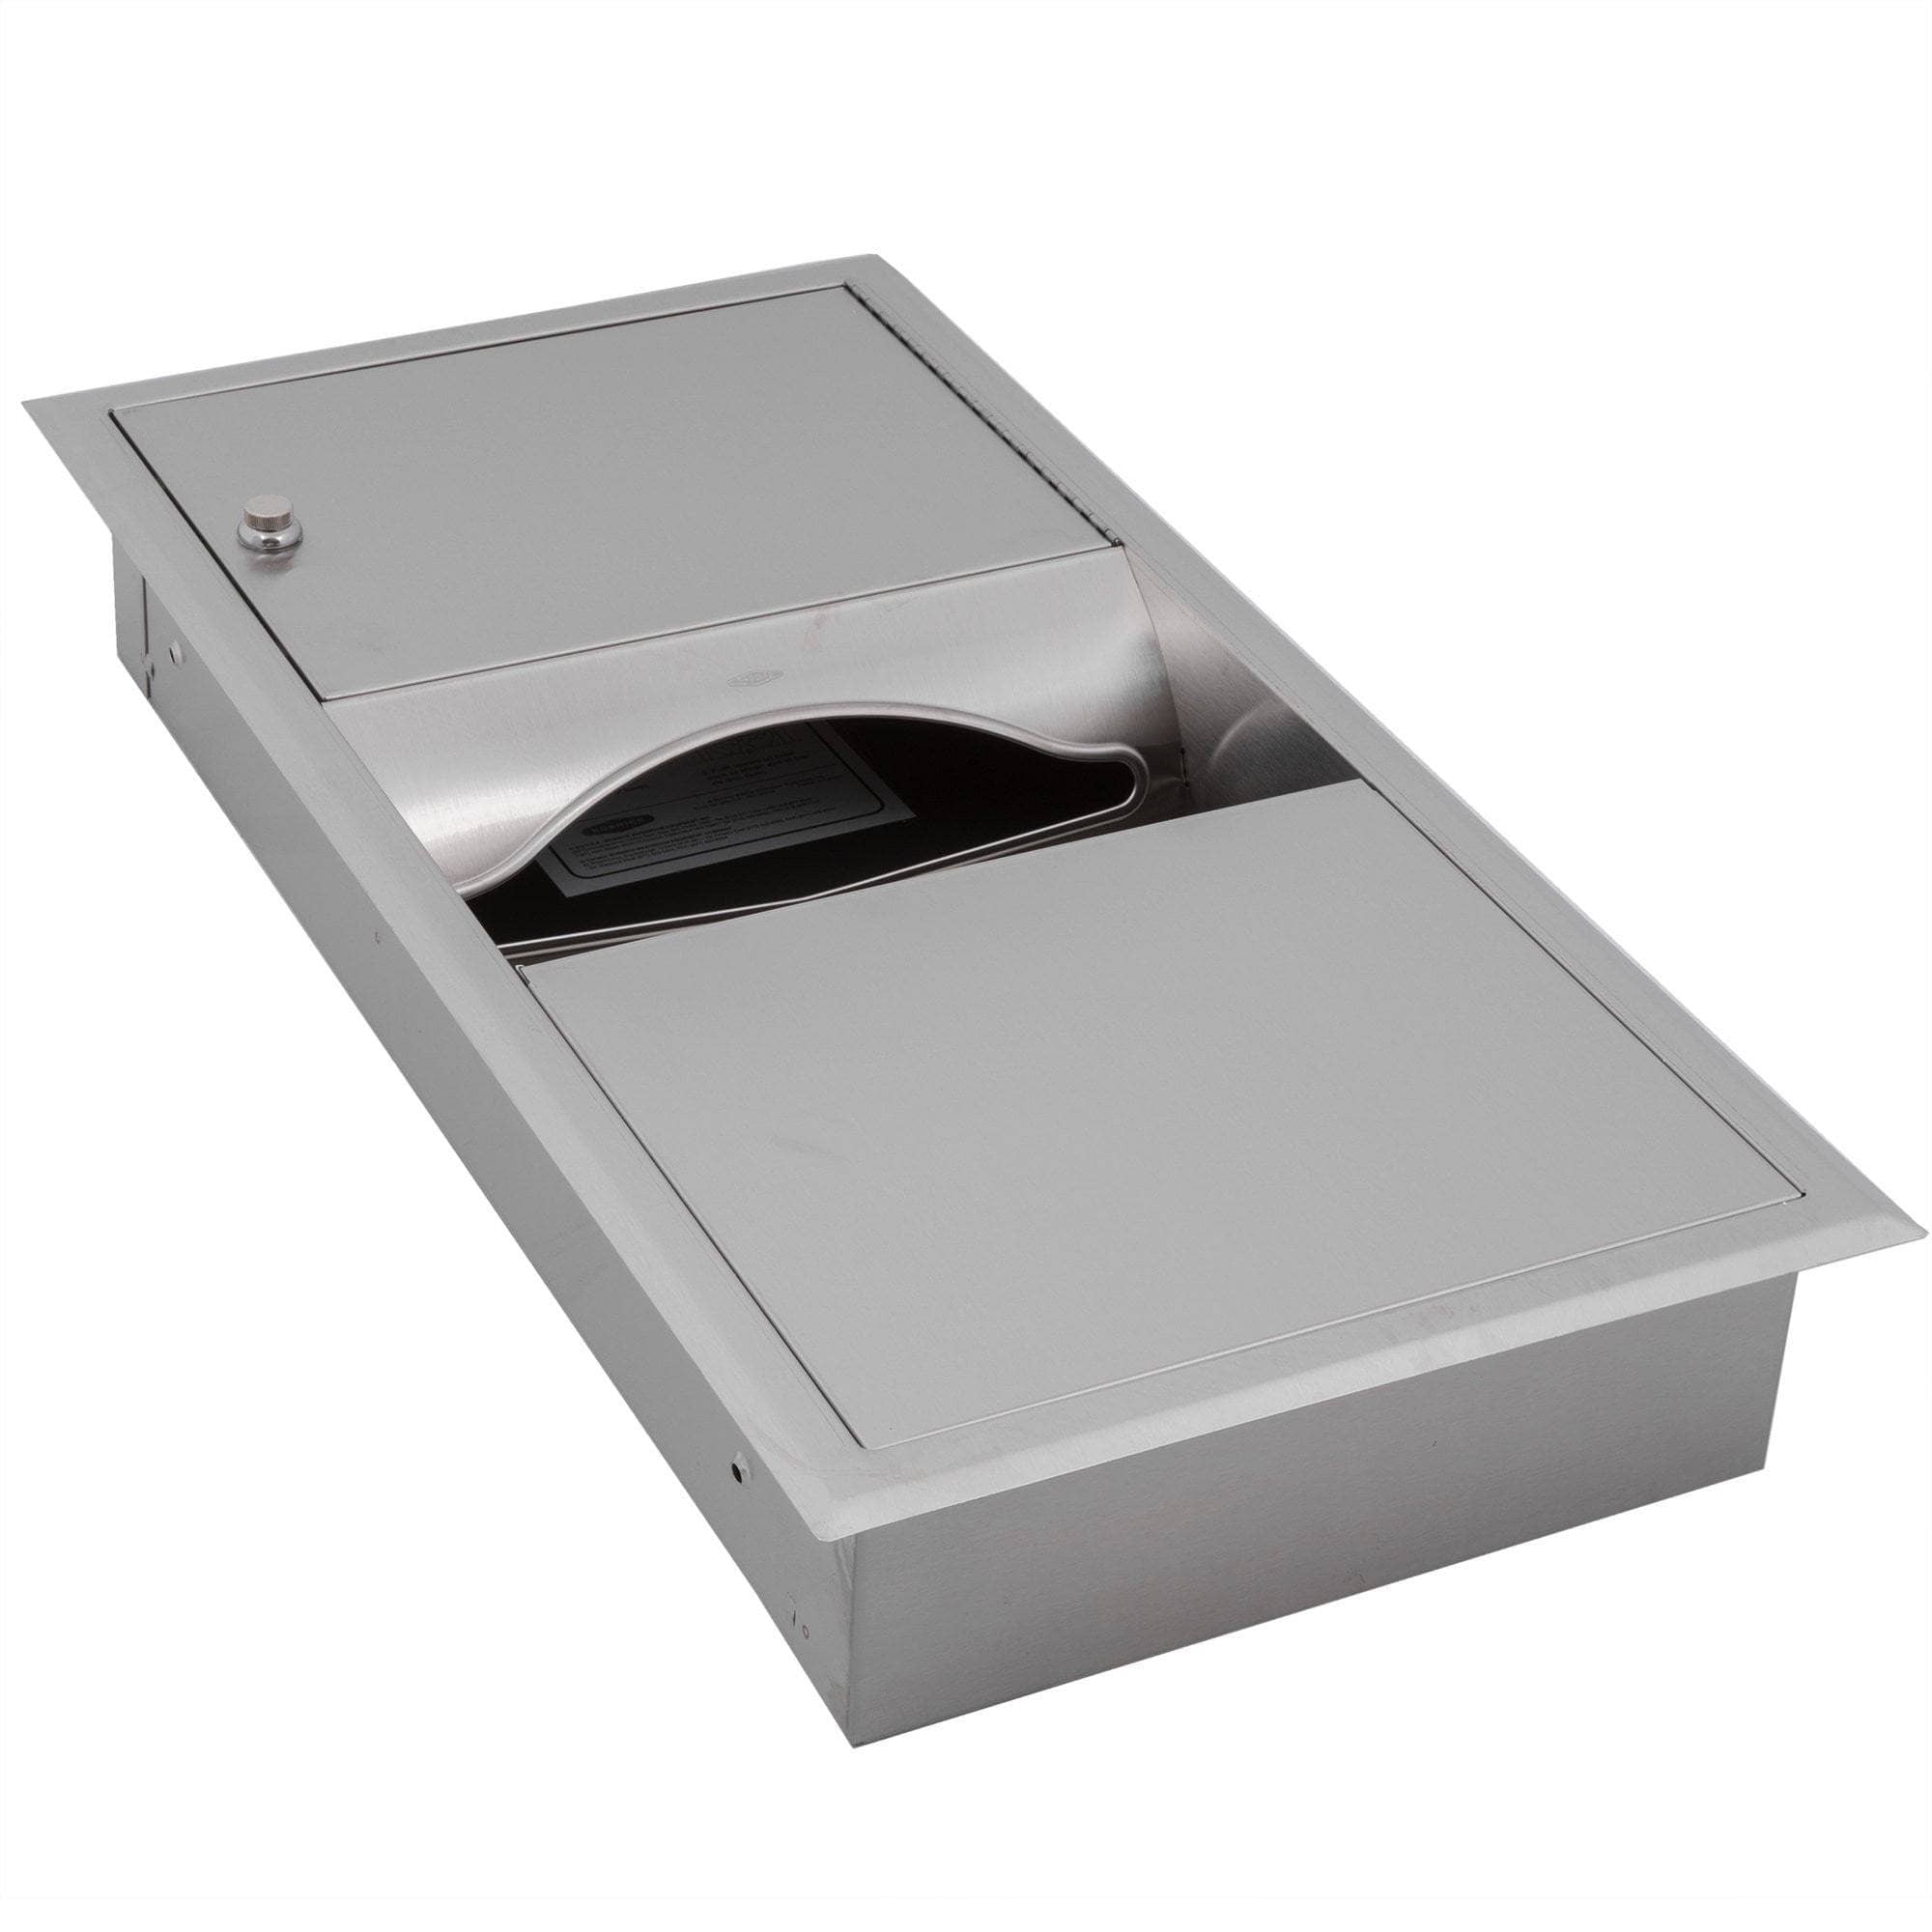 Bobrick B-369 Combination Commercial Paper Towel Dispenser/Waste Receptacle, Recessed-Mounted, Stainless Steel - TotalRestroom.com